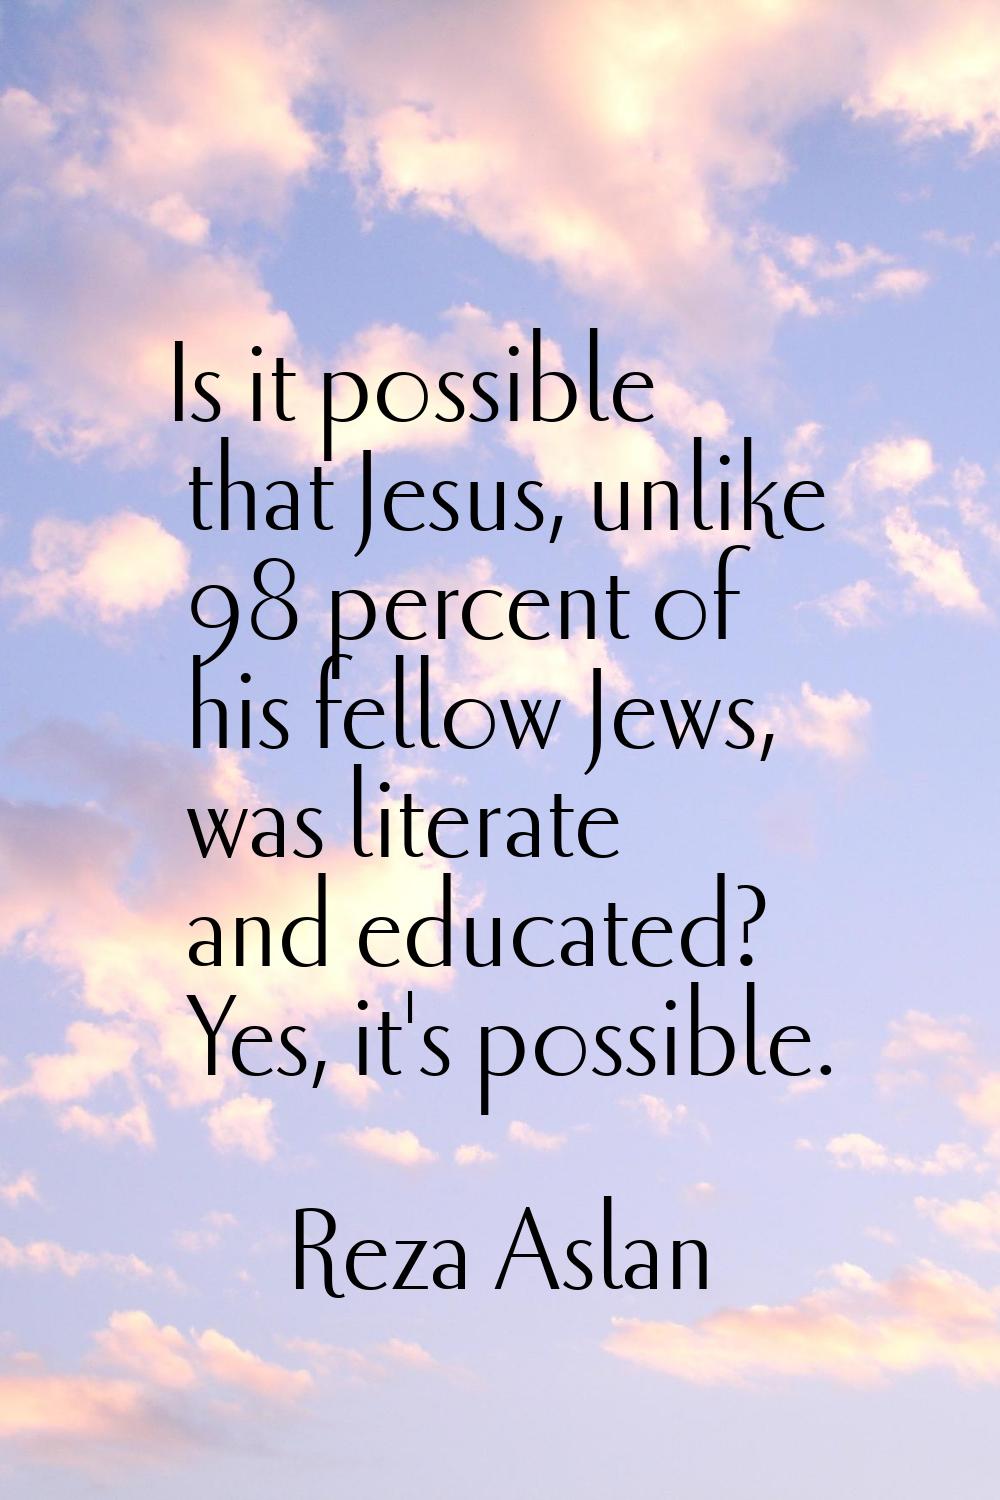 Is it possible that Jesus, unlike 98 percent of his fellow Jews, was literate and educated? Yes, it